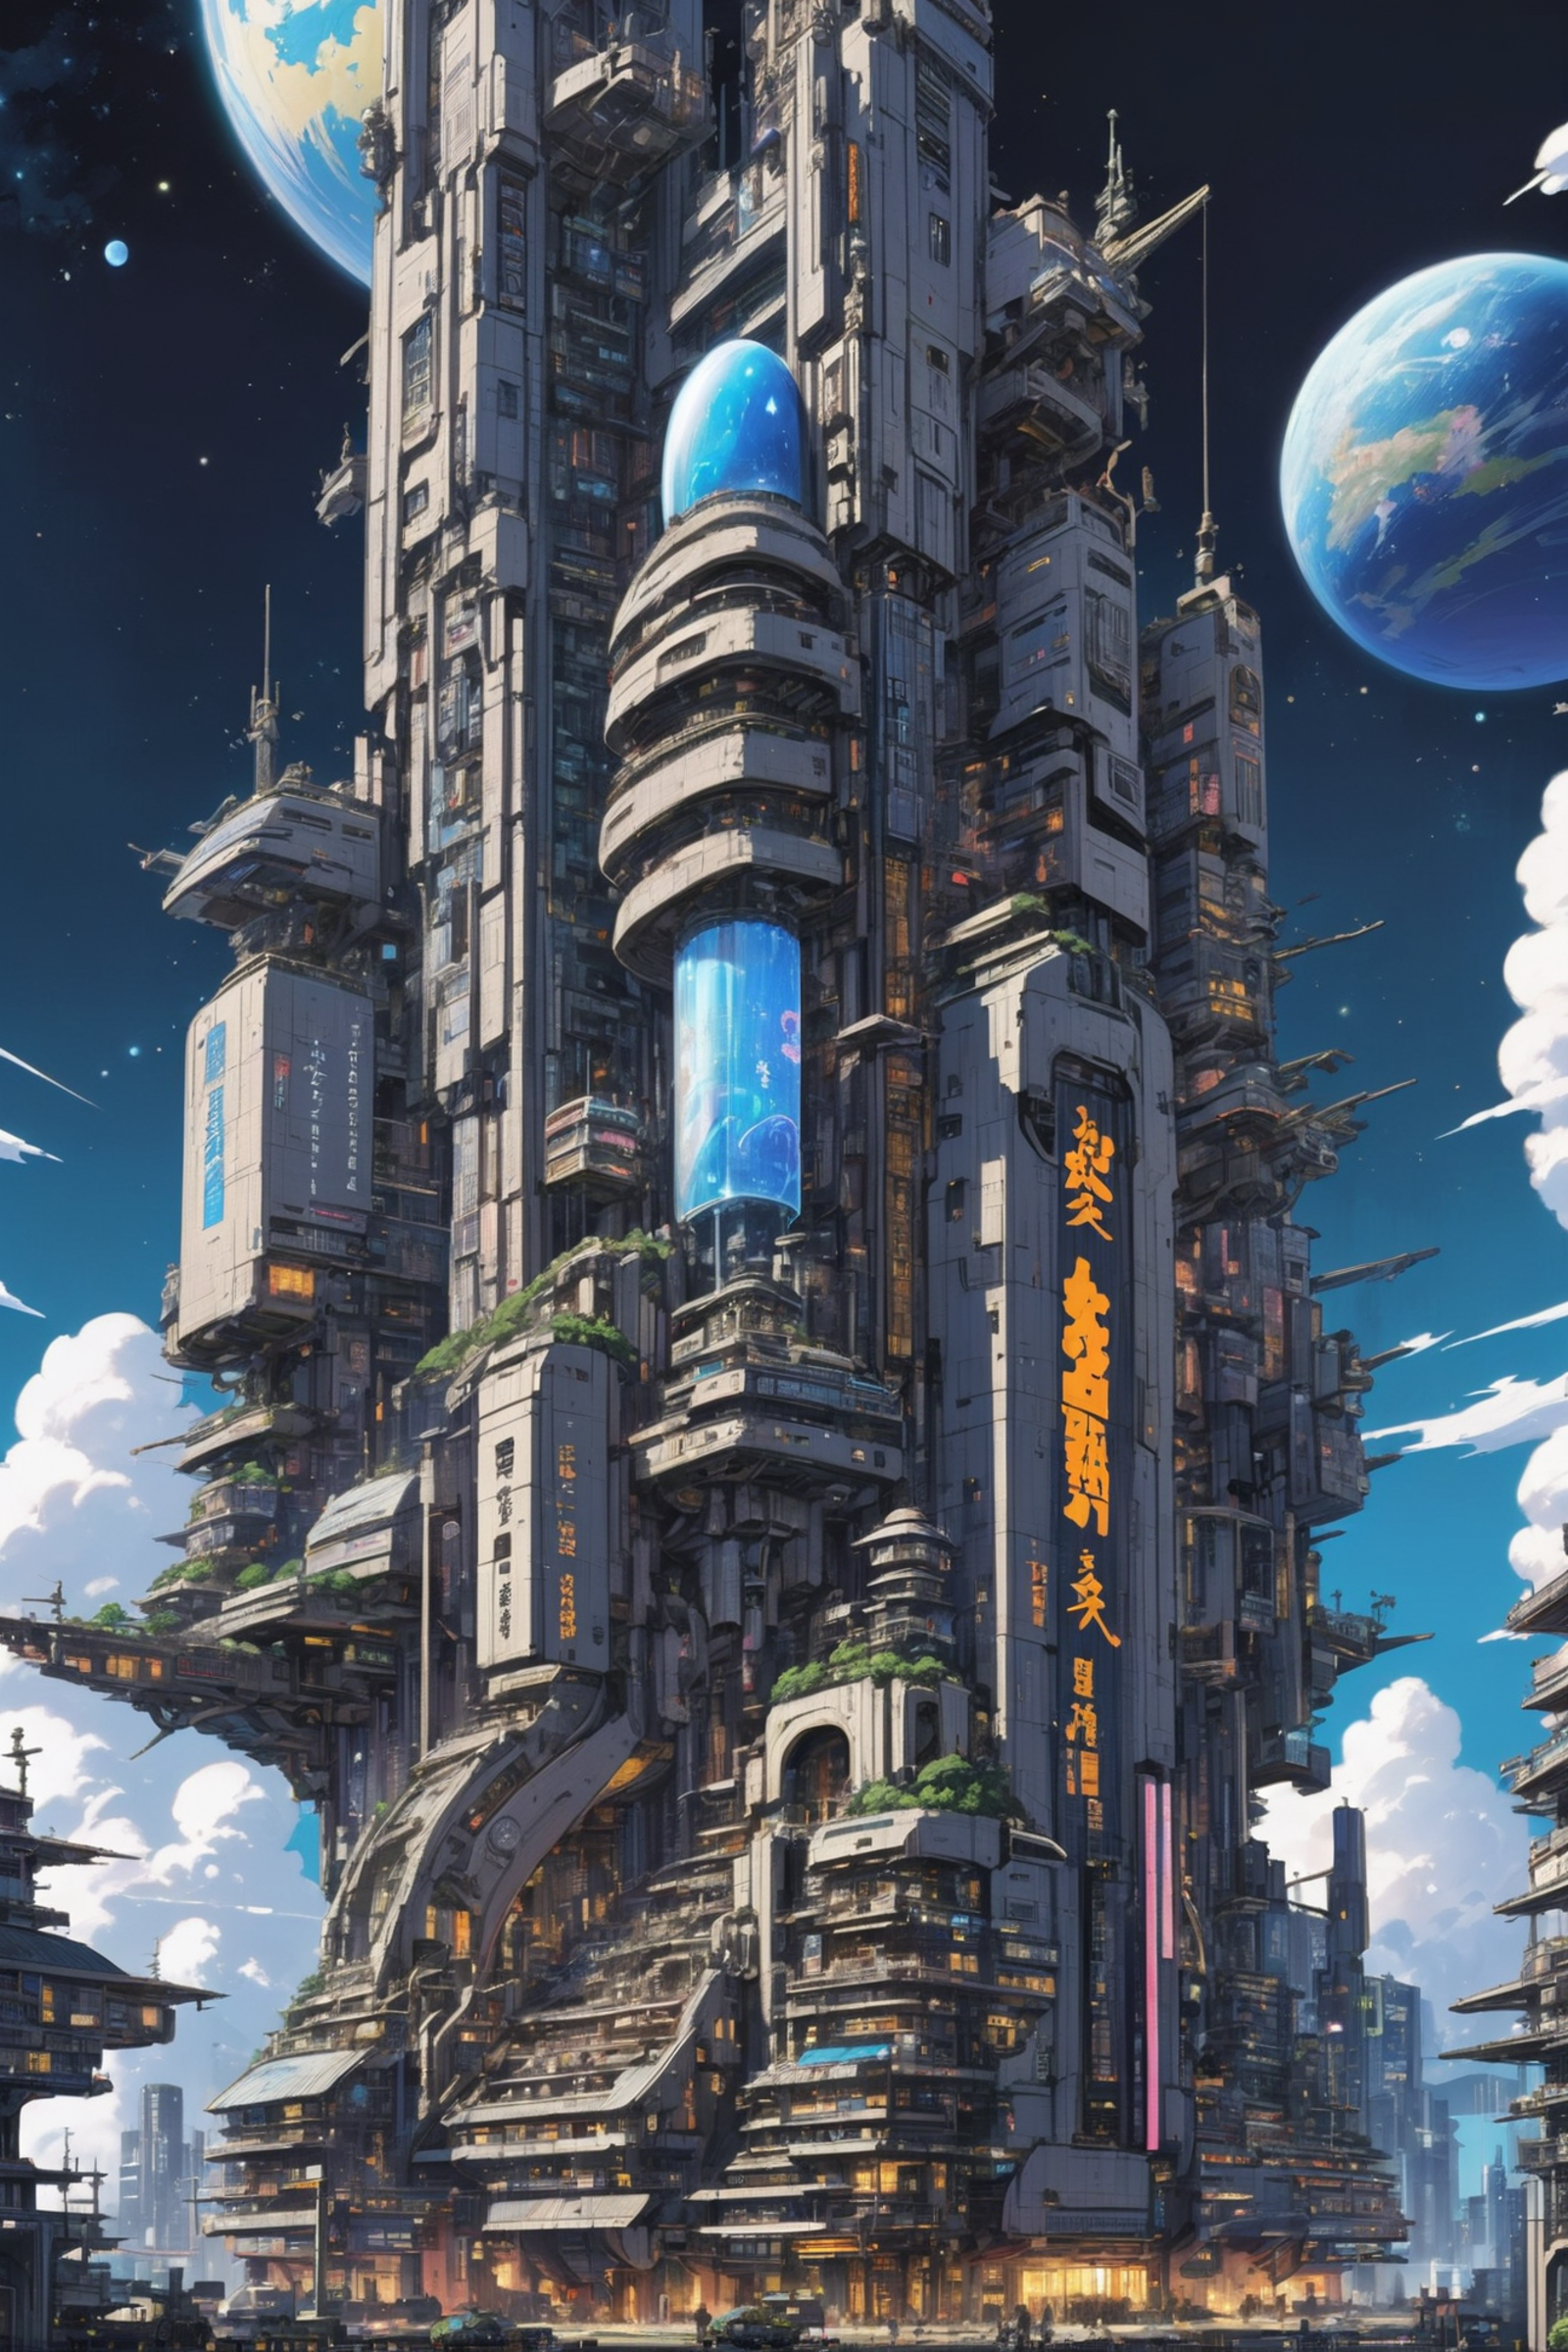 A futuristic sky city with a blue planet in the background.